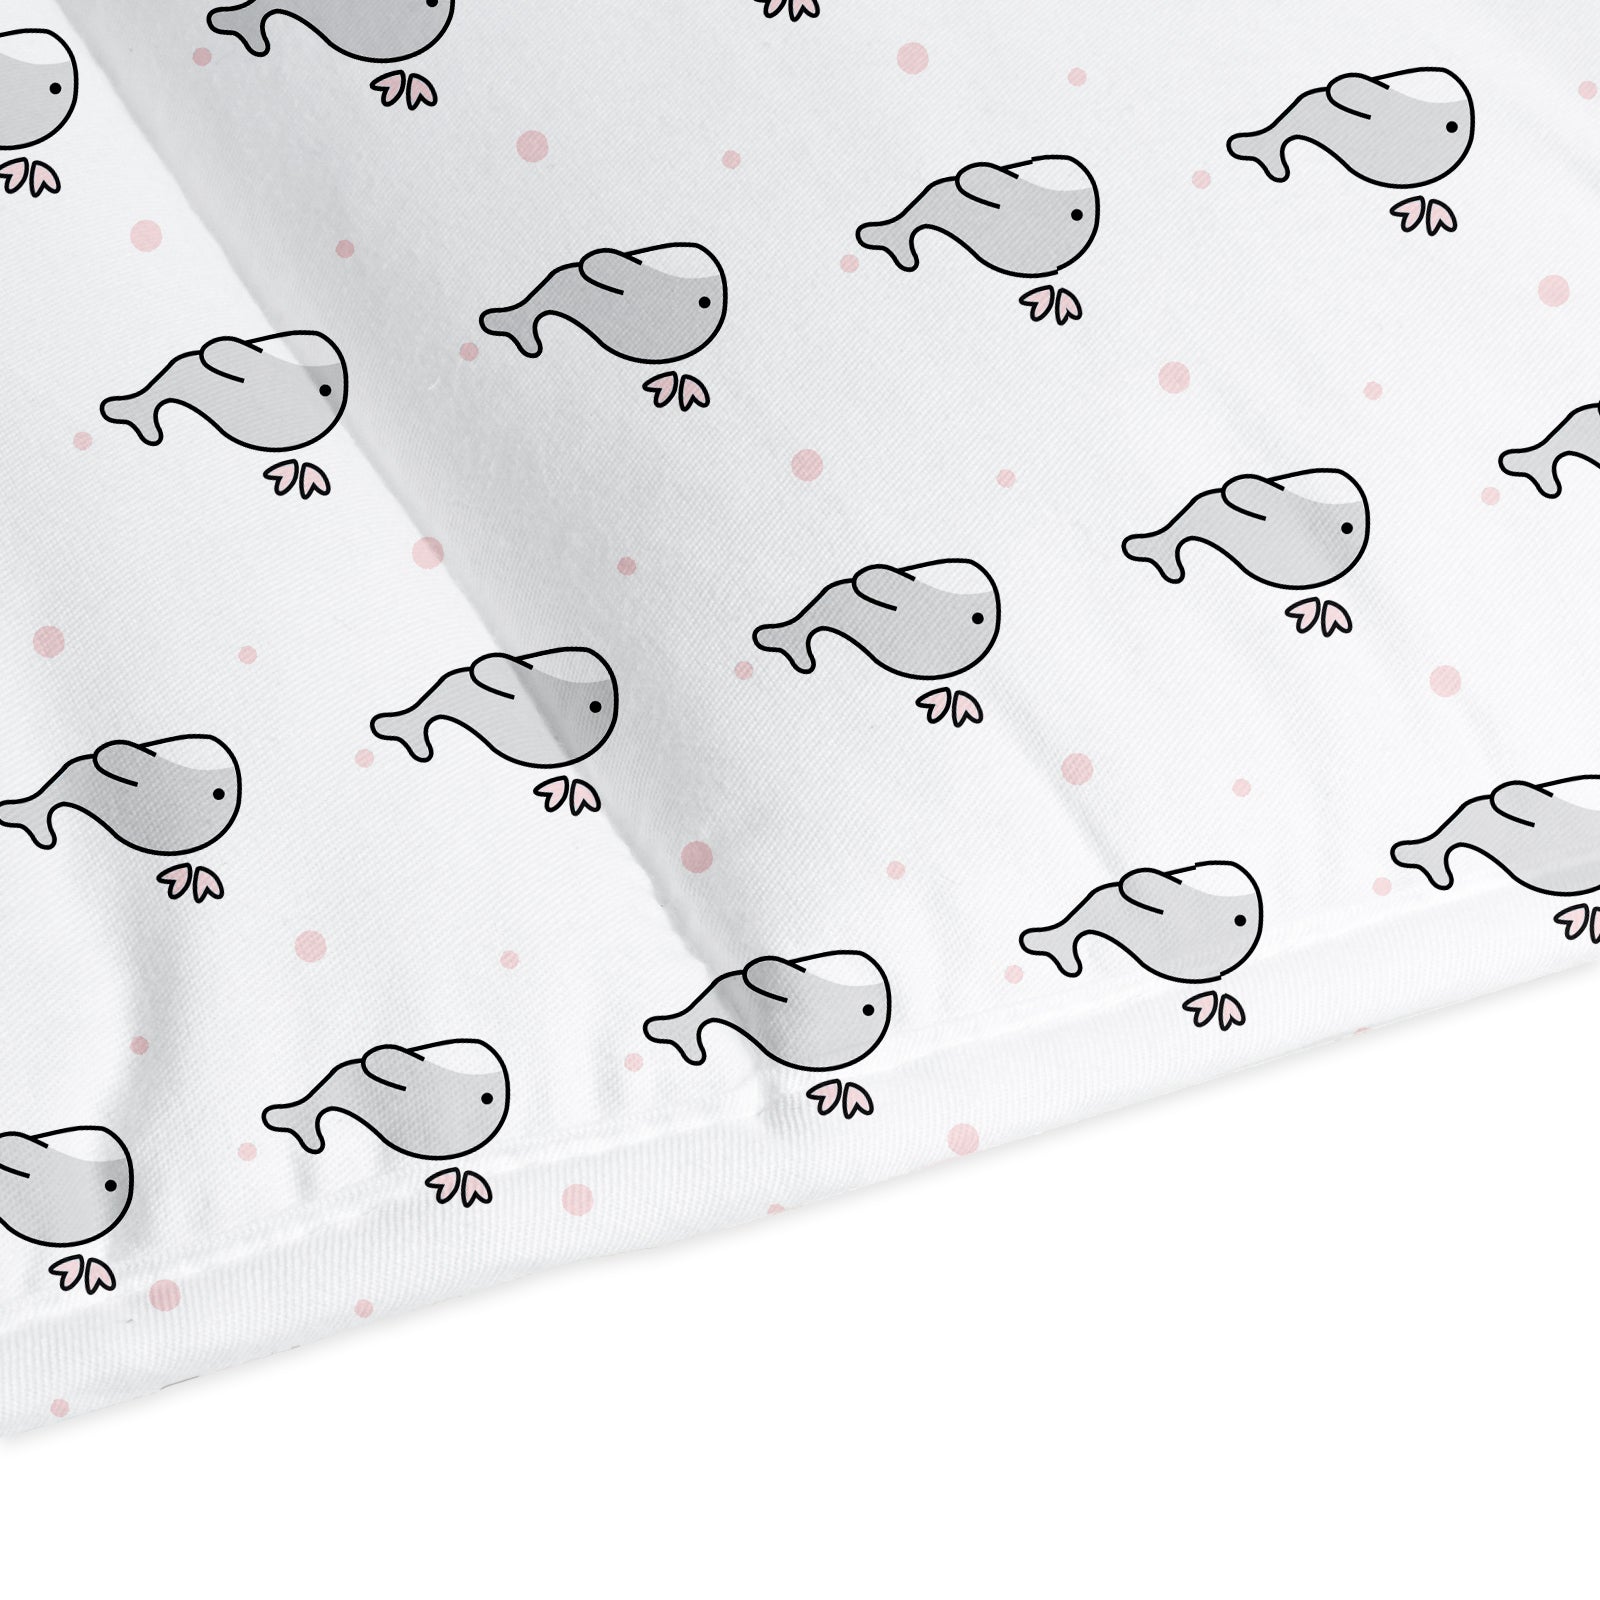 The White Cradle Baby Safe Cot Bumper Pad, Fits all Standard Cribs, Thick Padded Protective Liner for Child Nursery Bed, Soft Organic Cotton Fabric, Breathable, Non-Allergenic - Grey Whale with Pink Dots